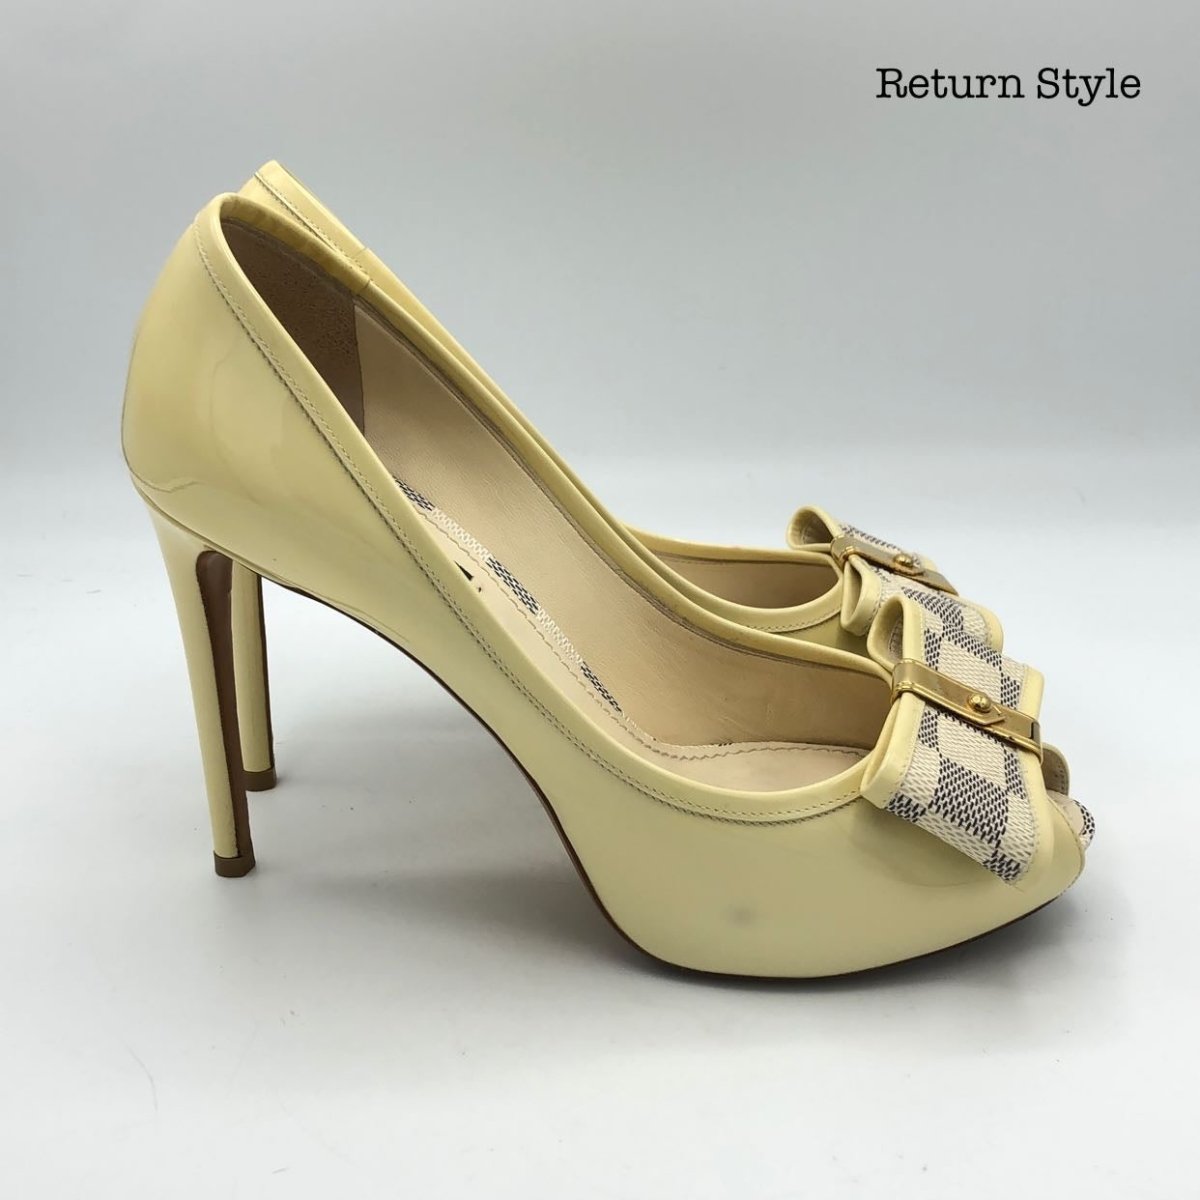 Pre-Owned Louis Vuitton Patent Leather Nude Pumps Size 39 US 8